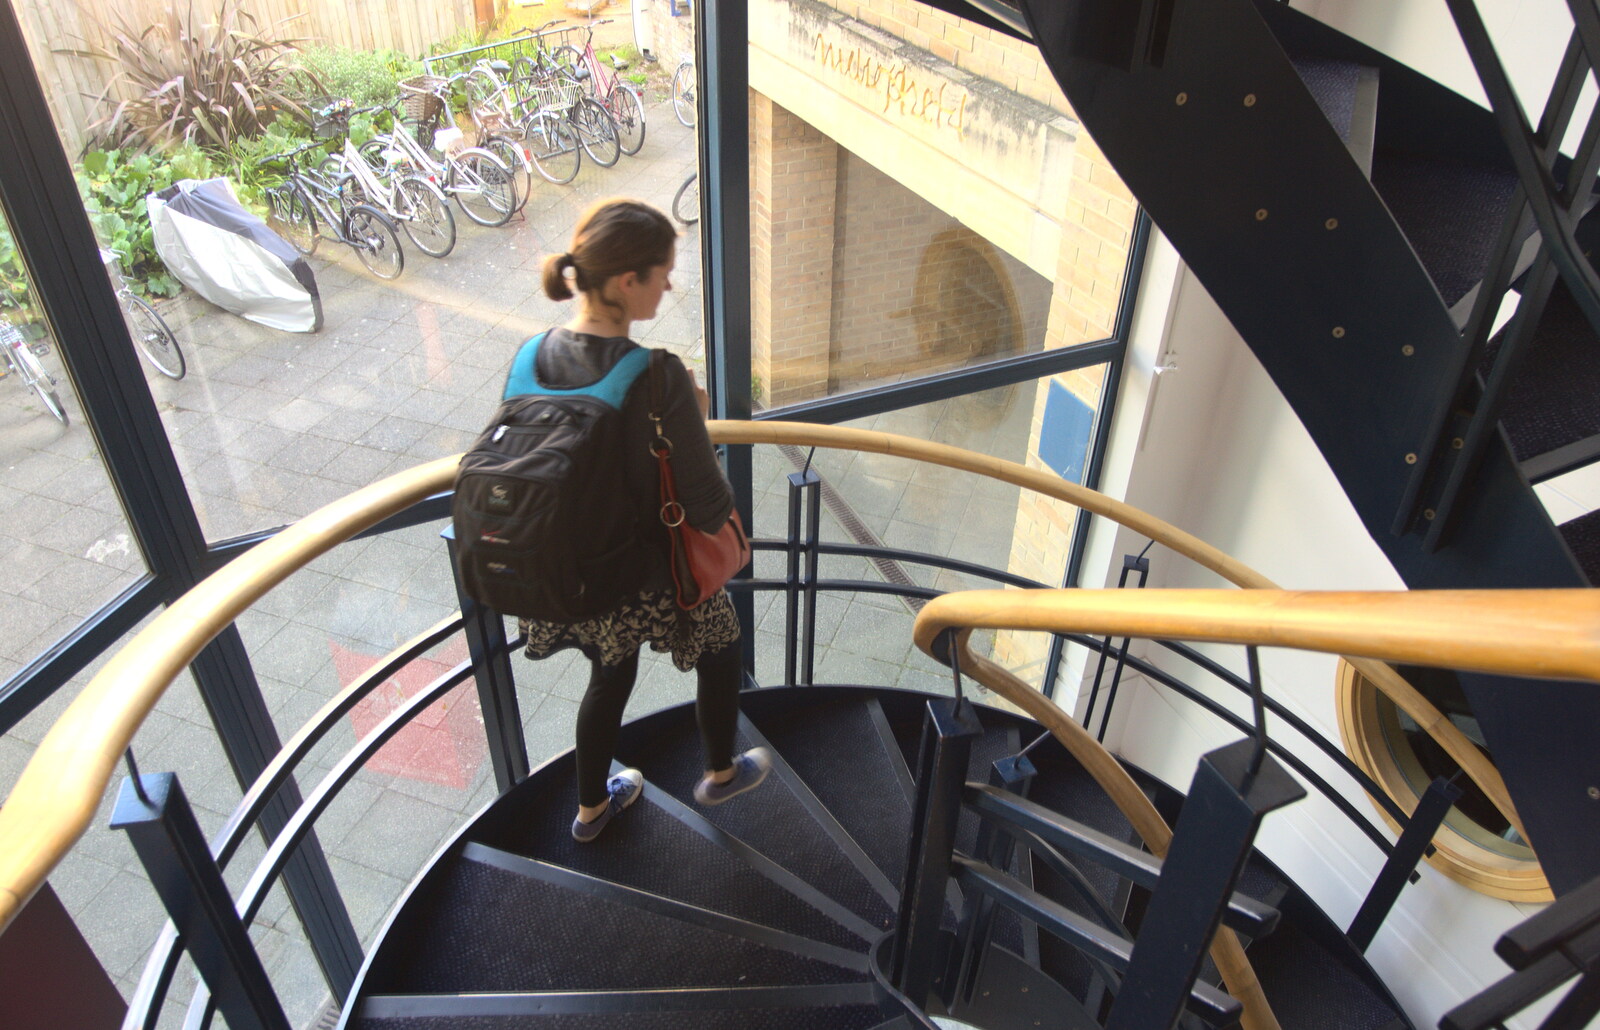 Back in the 'Bridge: an Anniversary, Cambridge - 3rd July 2016: Isobel on the spiral stairs of 'staircase 4'